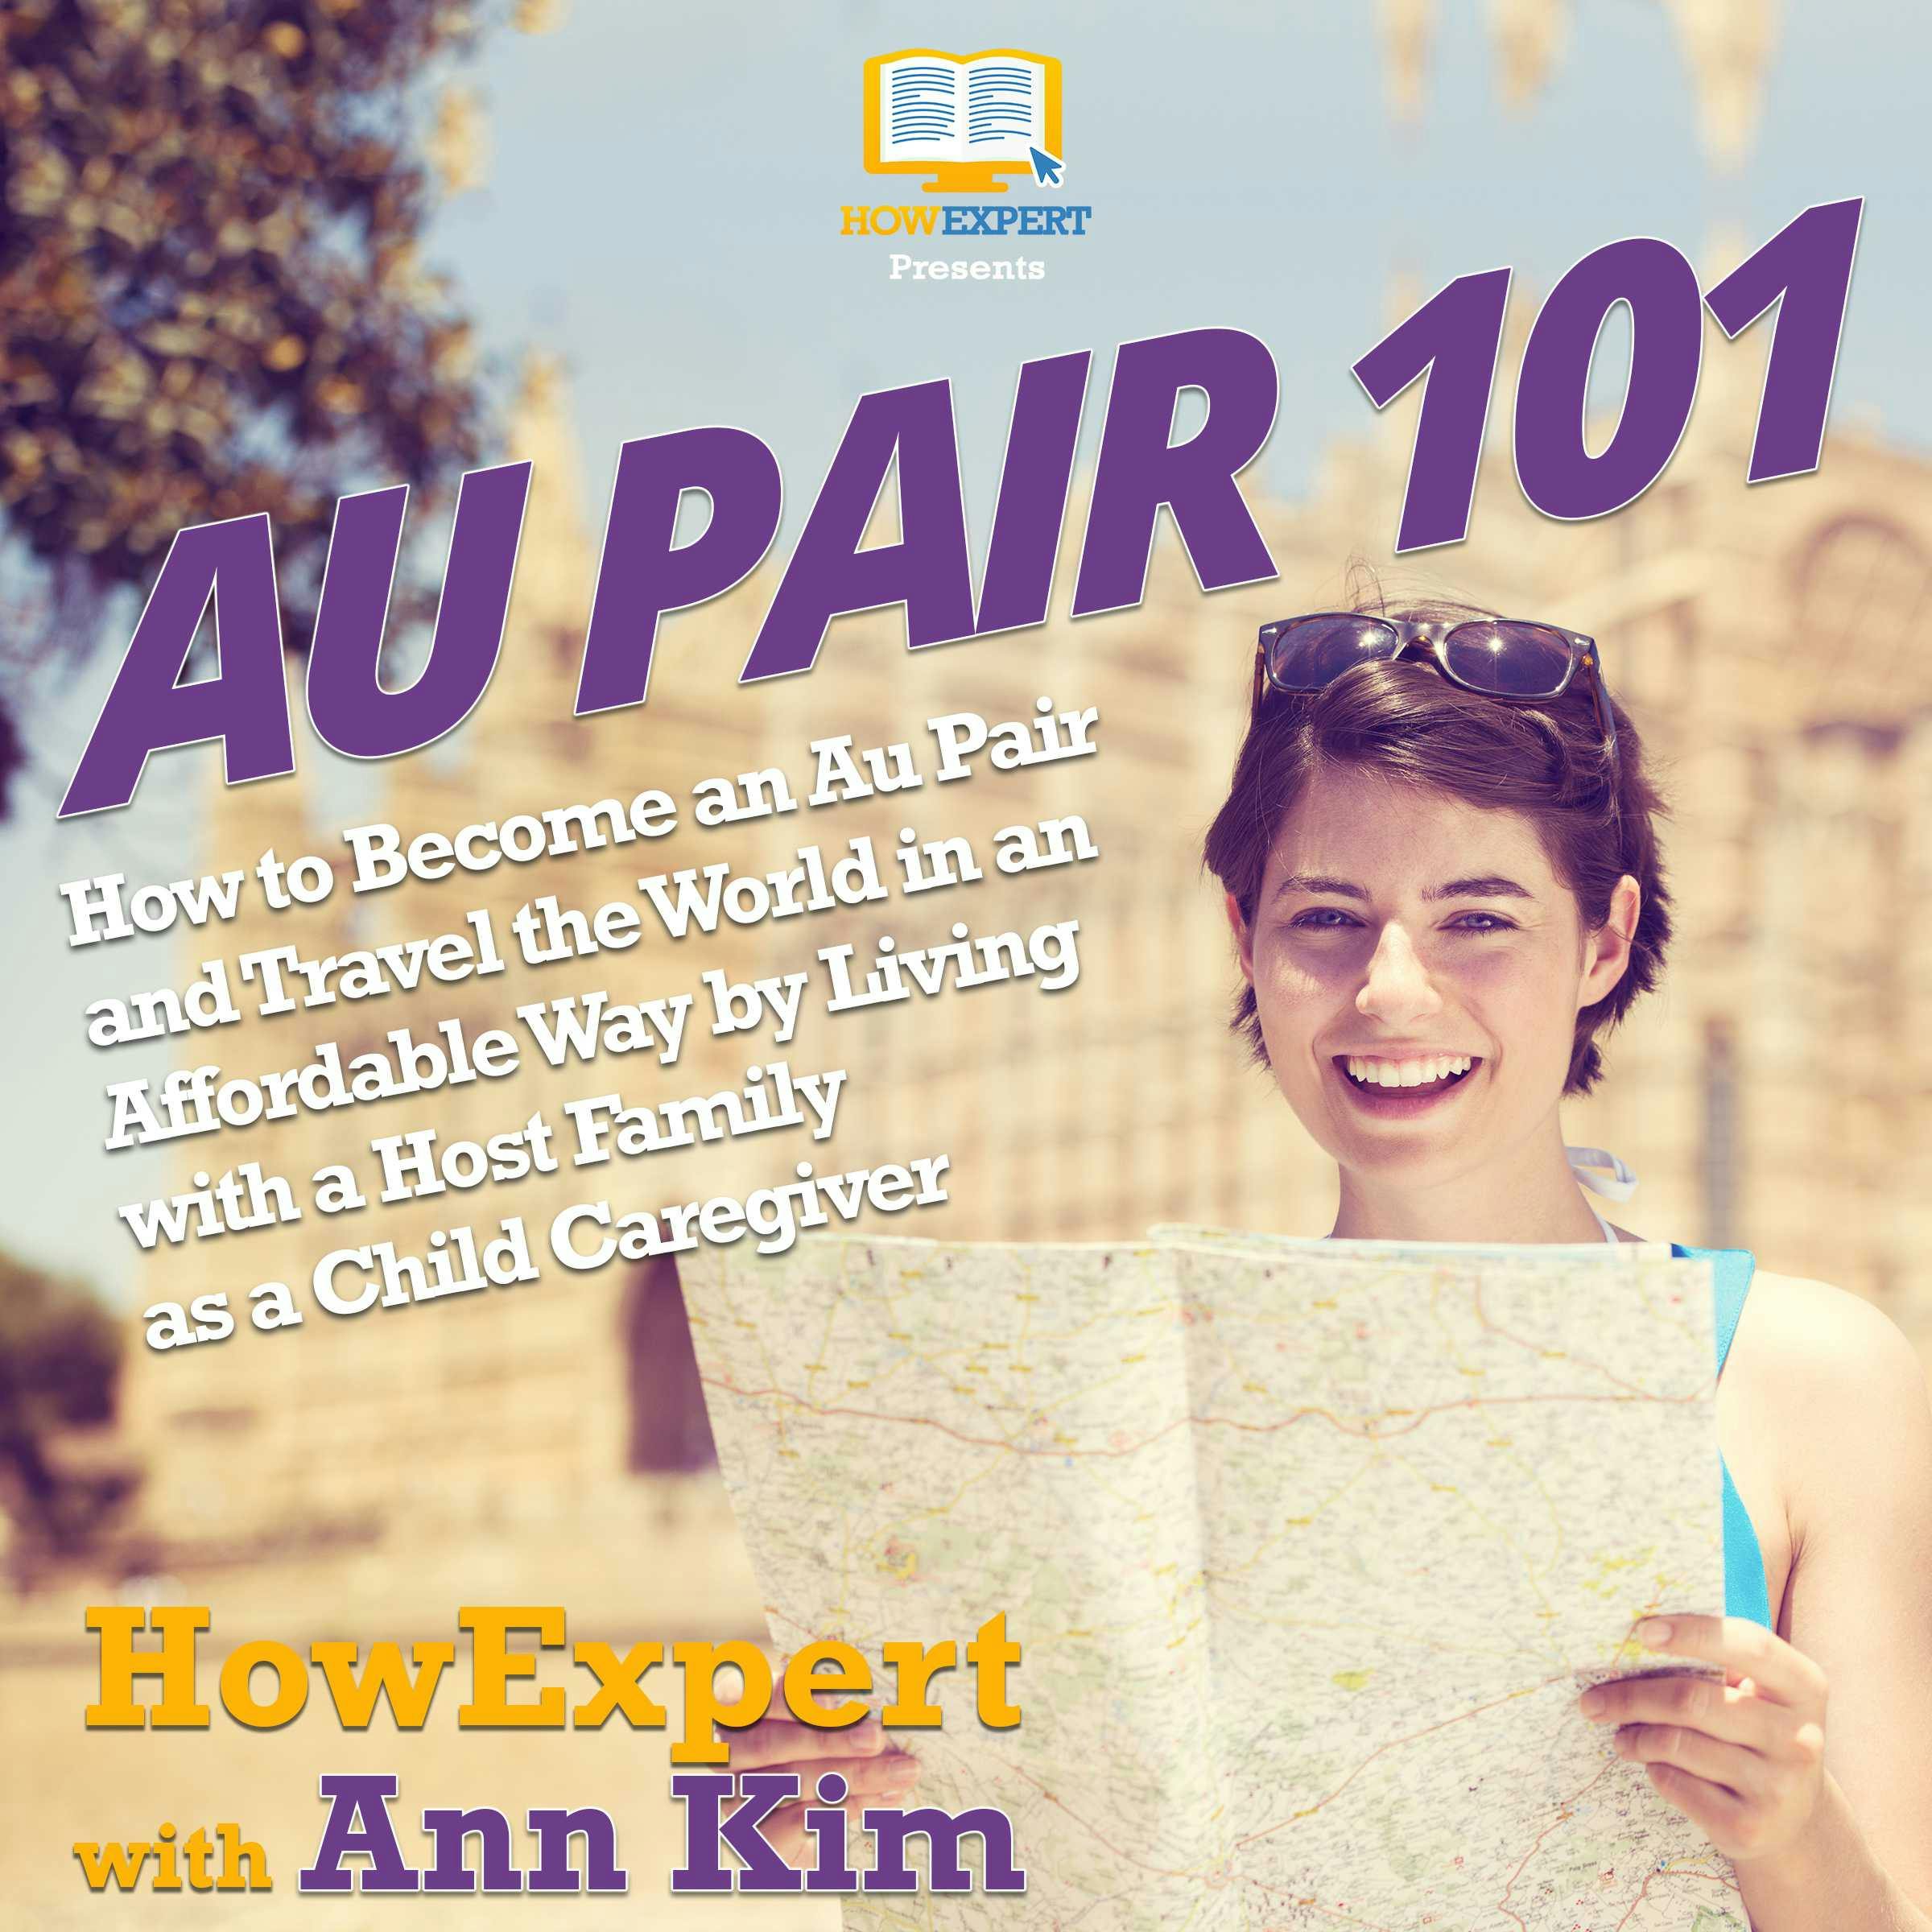 Au Pair 101: How to Become an Au Pair and Travel the World in an Affordable Way by Living with a Host Family as a Child Caregiver - Ann Kim, HowExpert